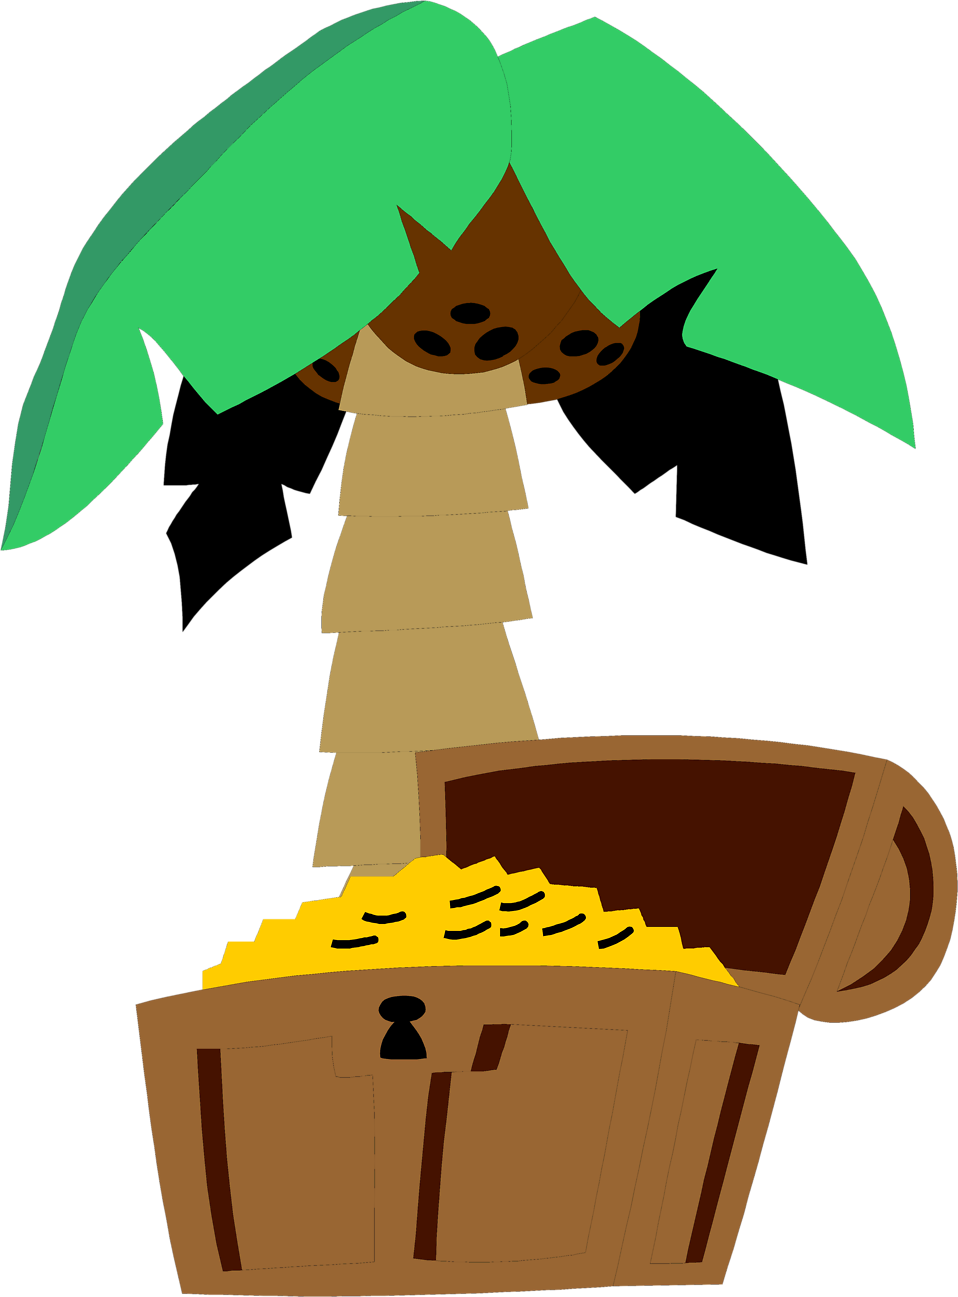 Illustration Of A Treasure Chest And A Palm Tree - Treasure Chest And Palm Tree (958x1297)